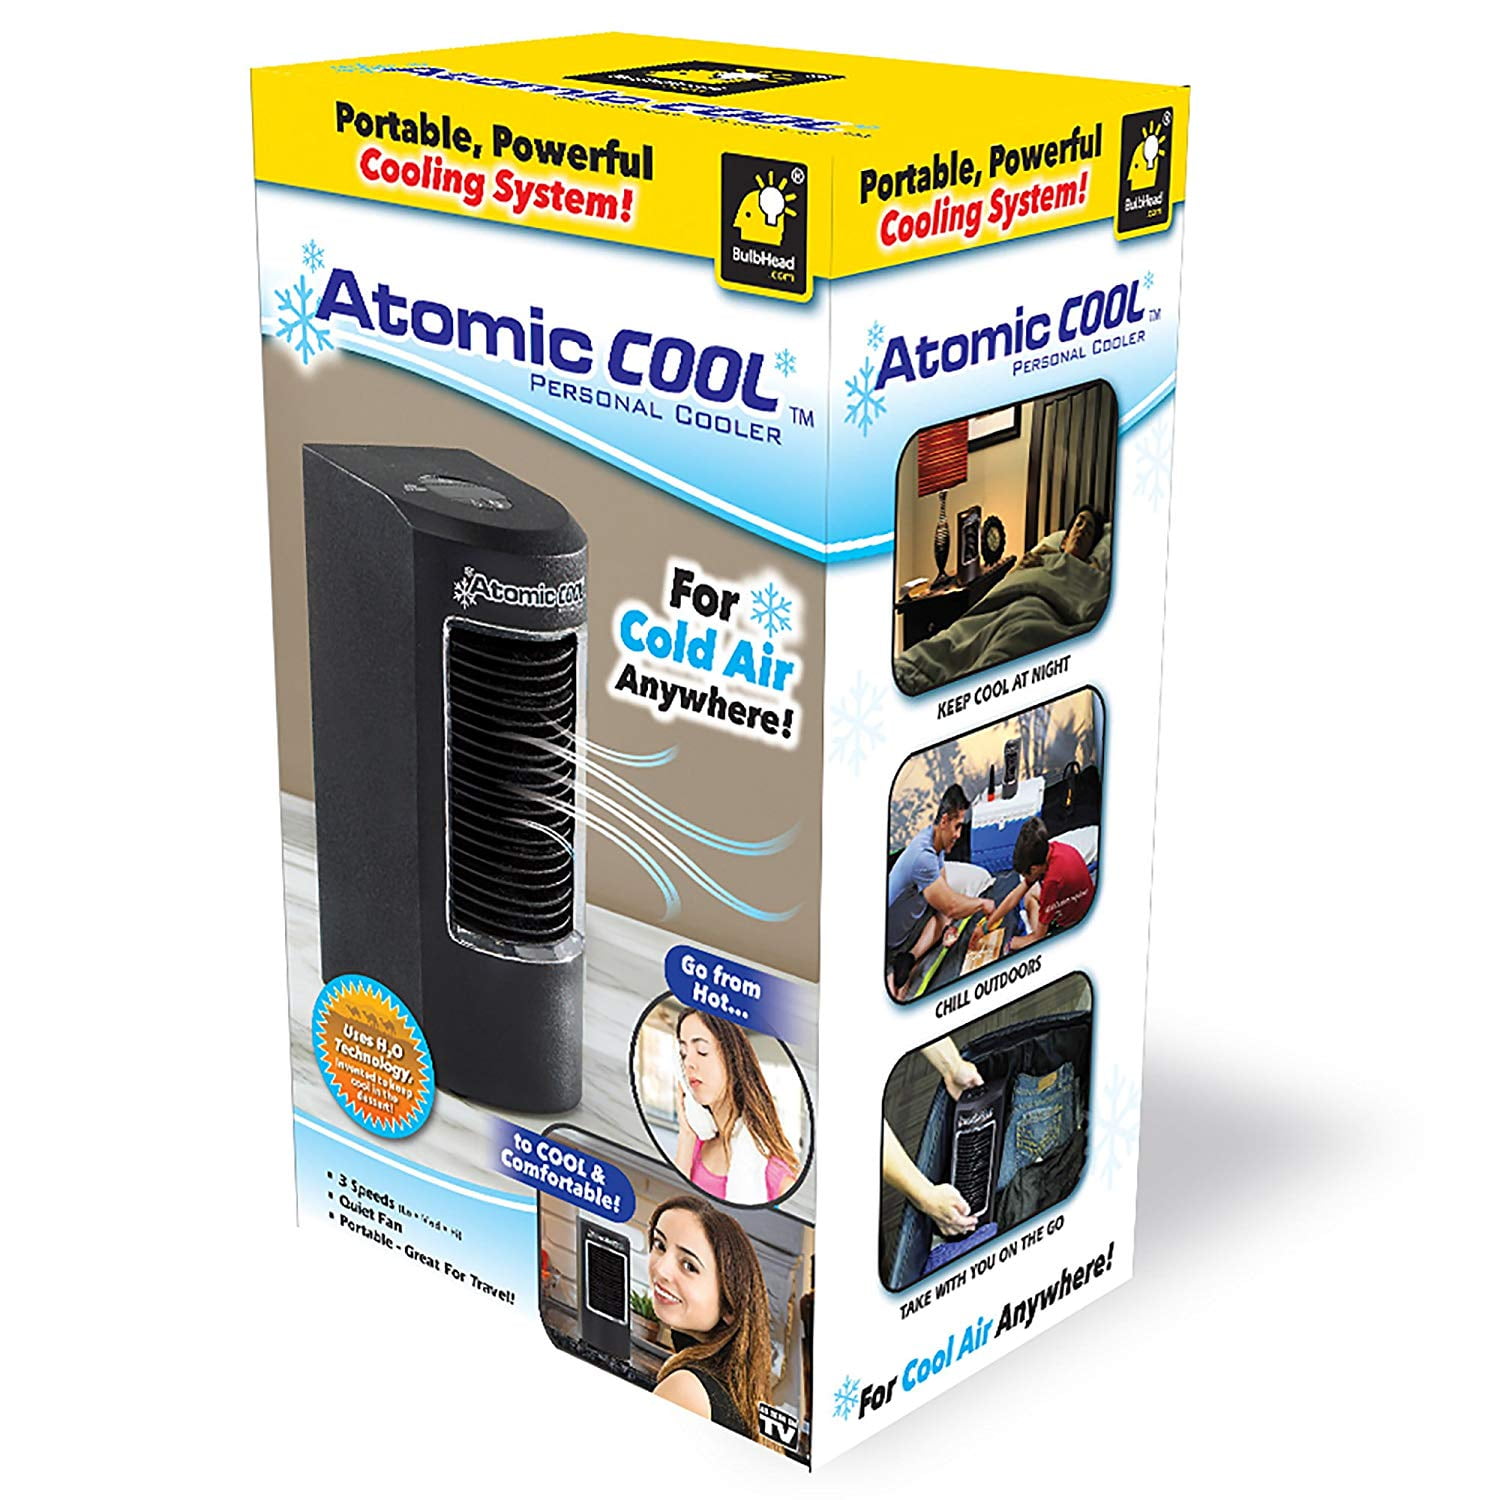 atomic cool personal cooler